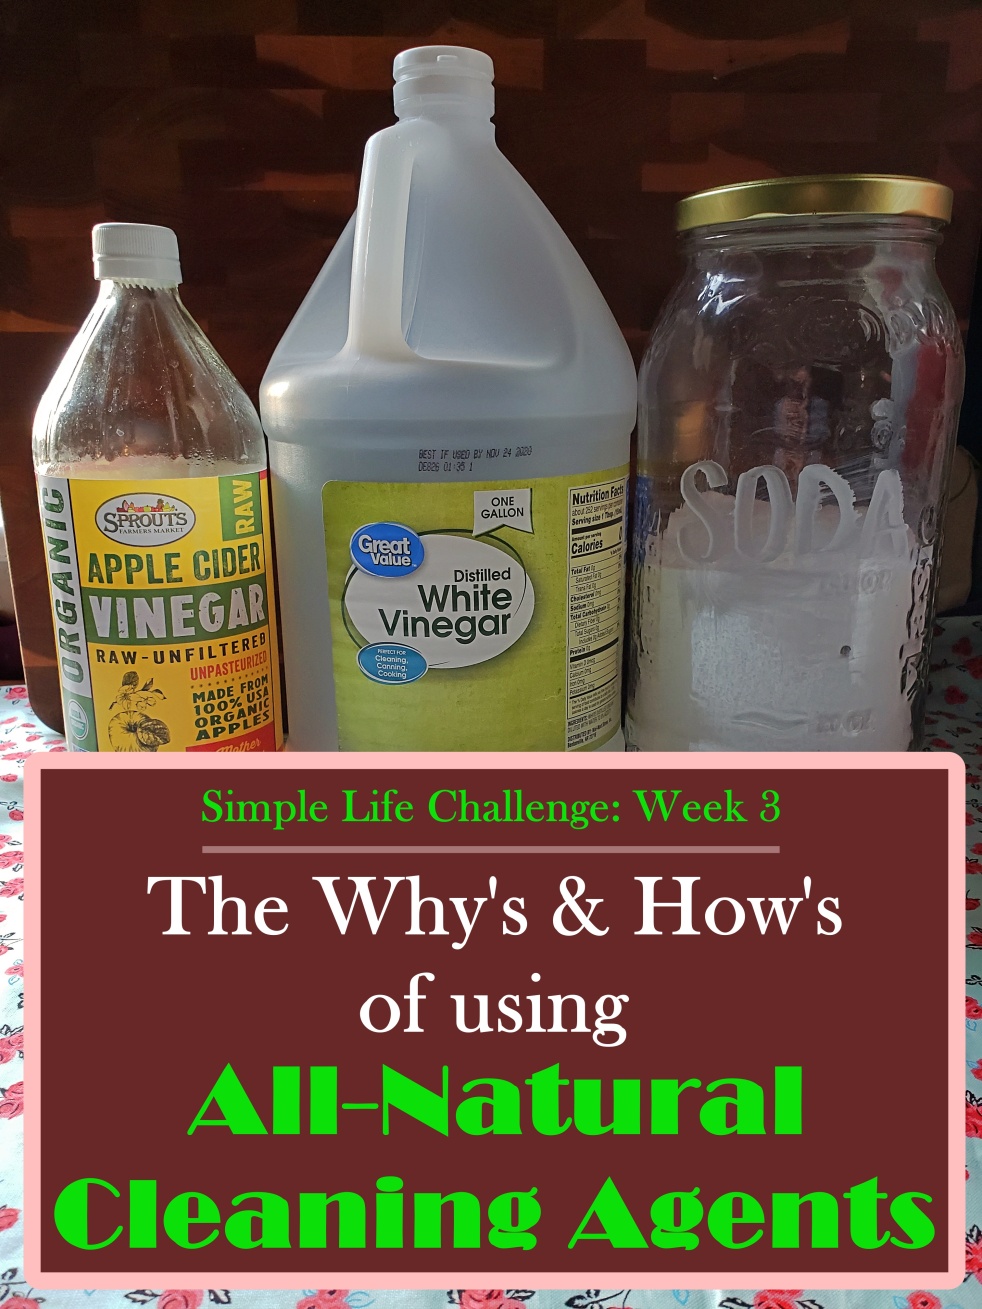 All-Natural Cleaning Agents